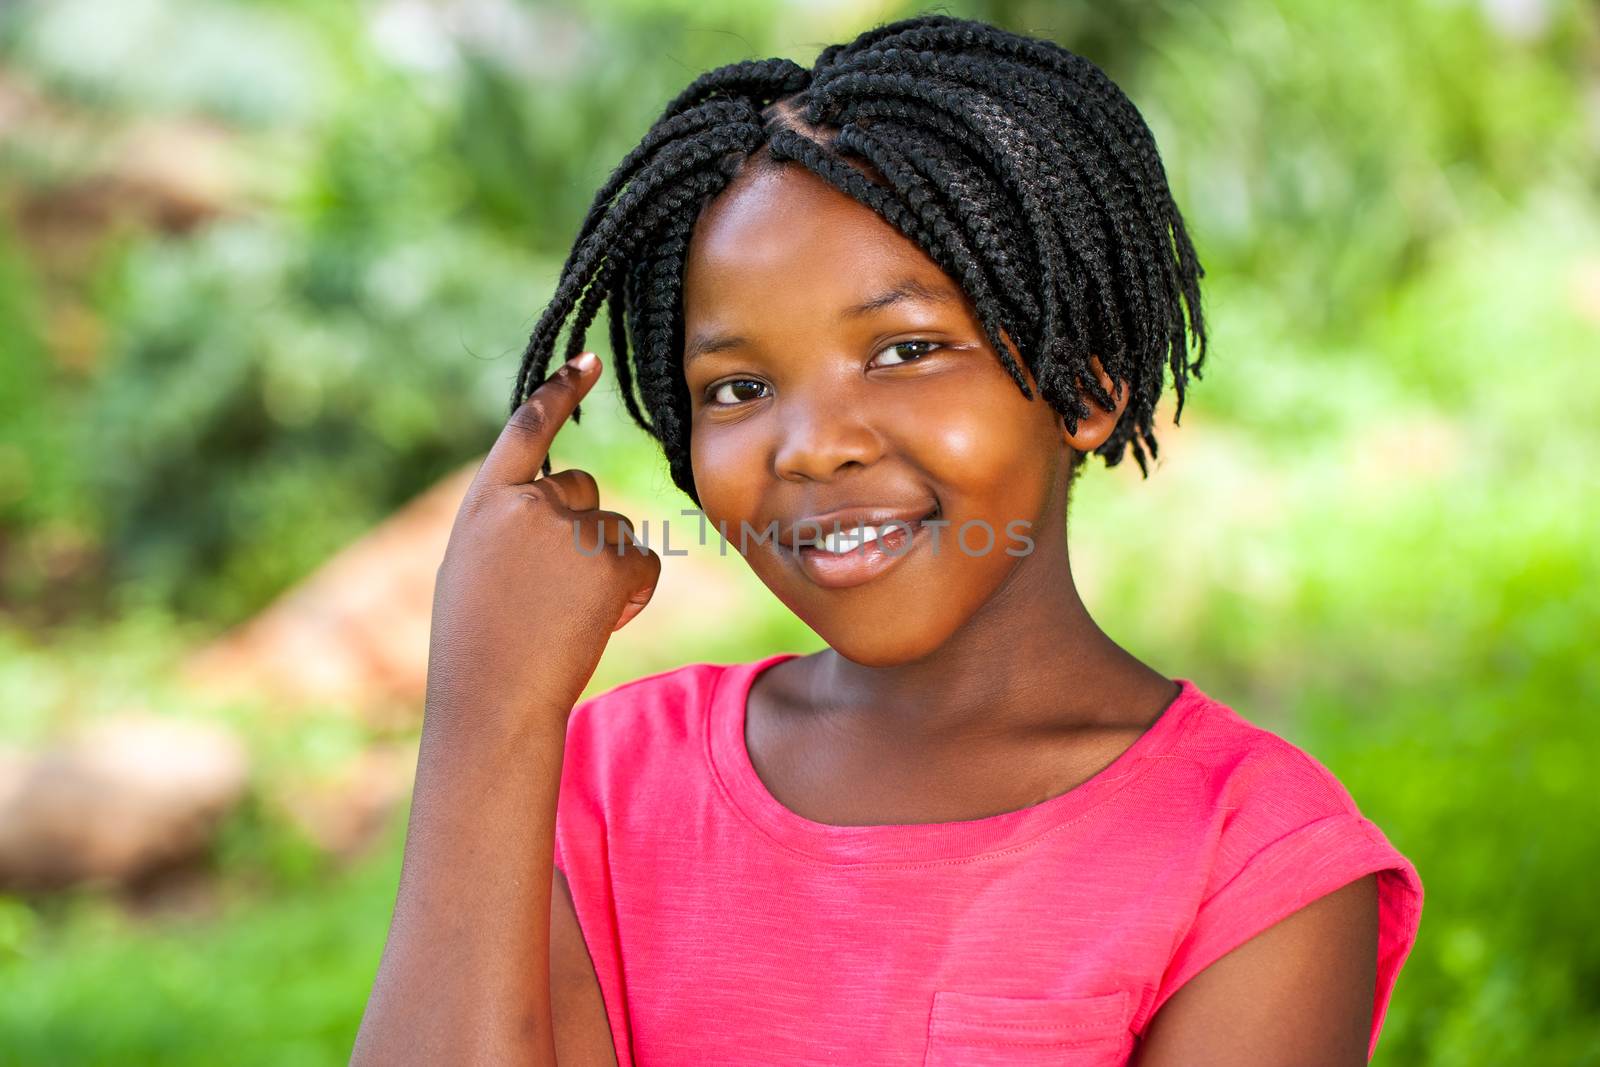 Close up portrait of Cute African girl showing braided hair outdoors in park.